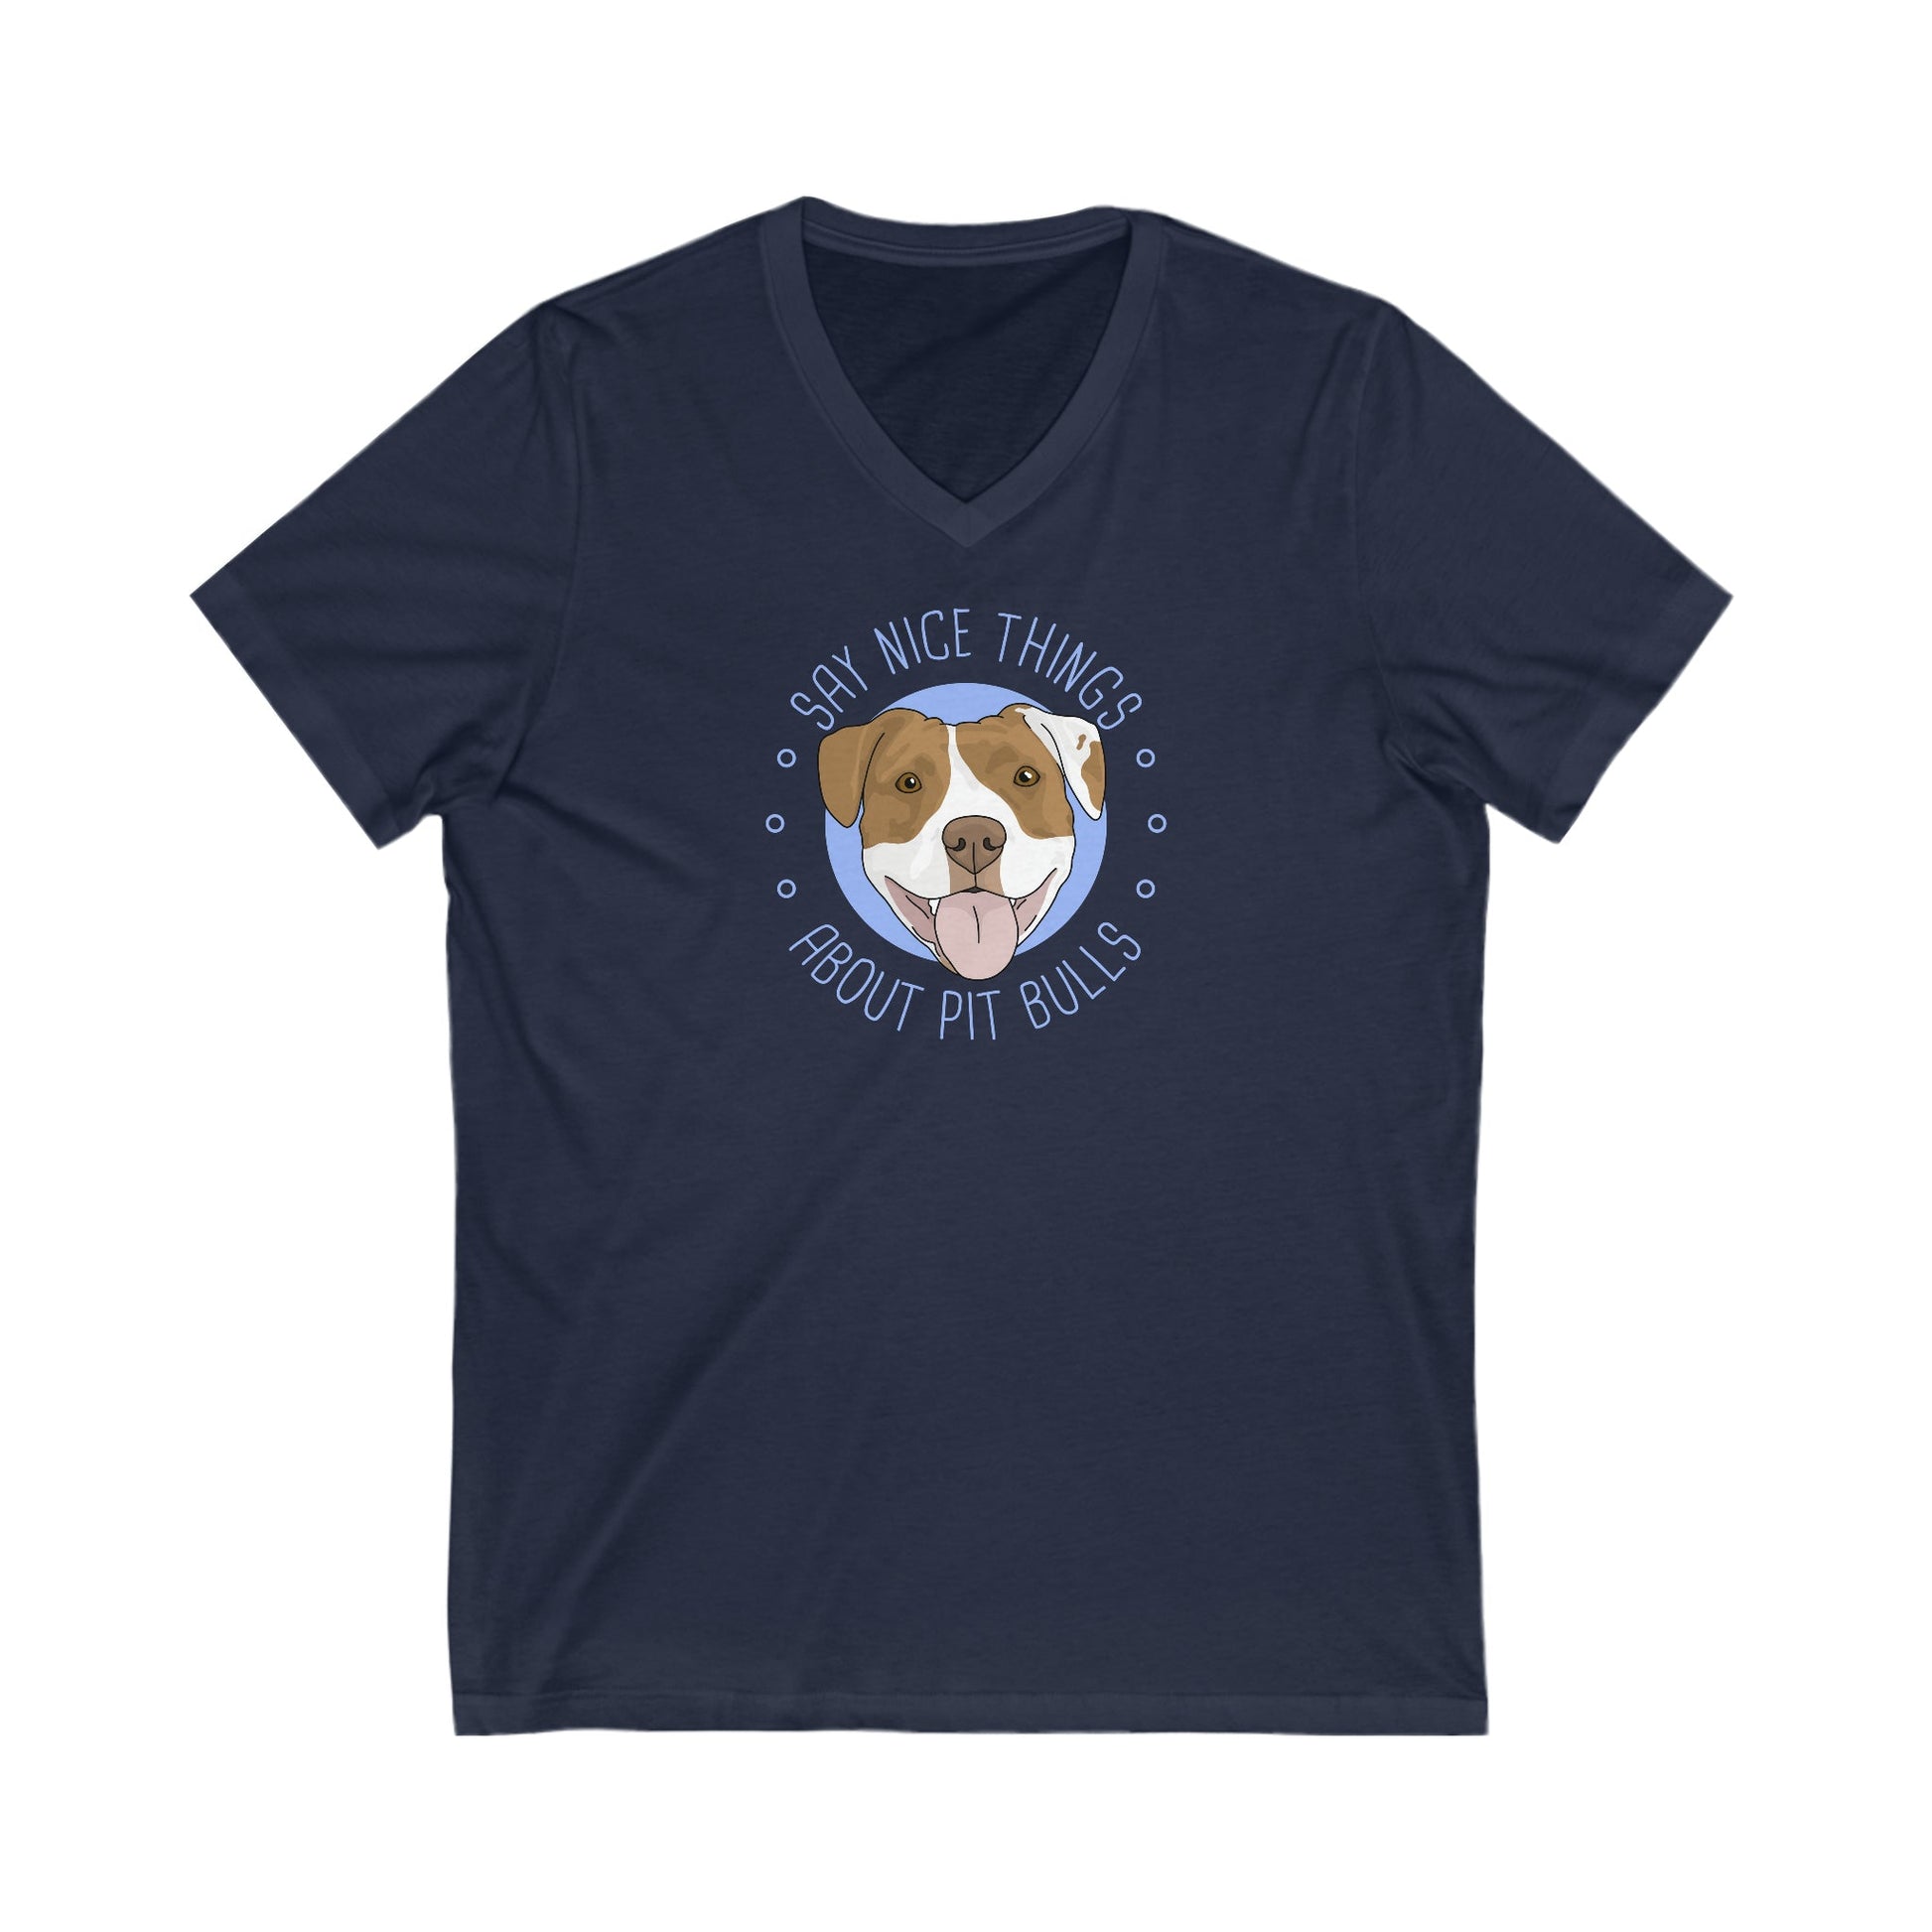 Say Nice Things About Pit Bulls | Unisex V-Neck Tee - Detezi Designs-26029667526025016501